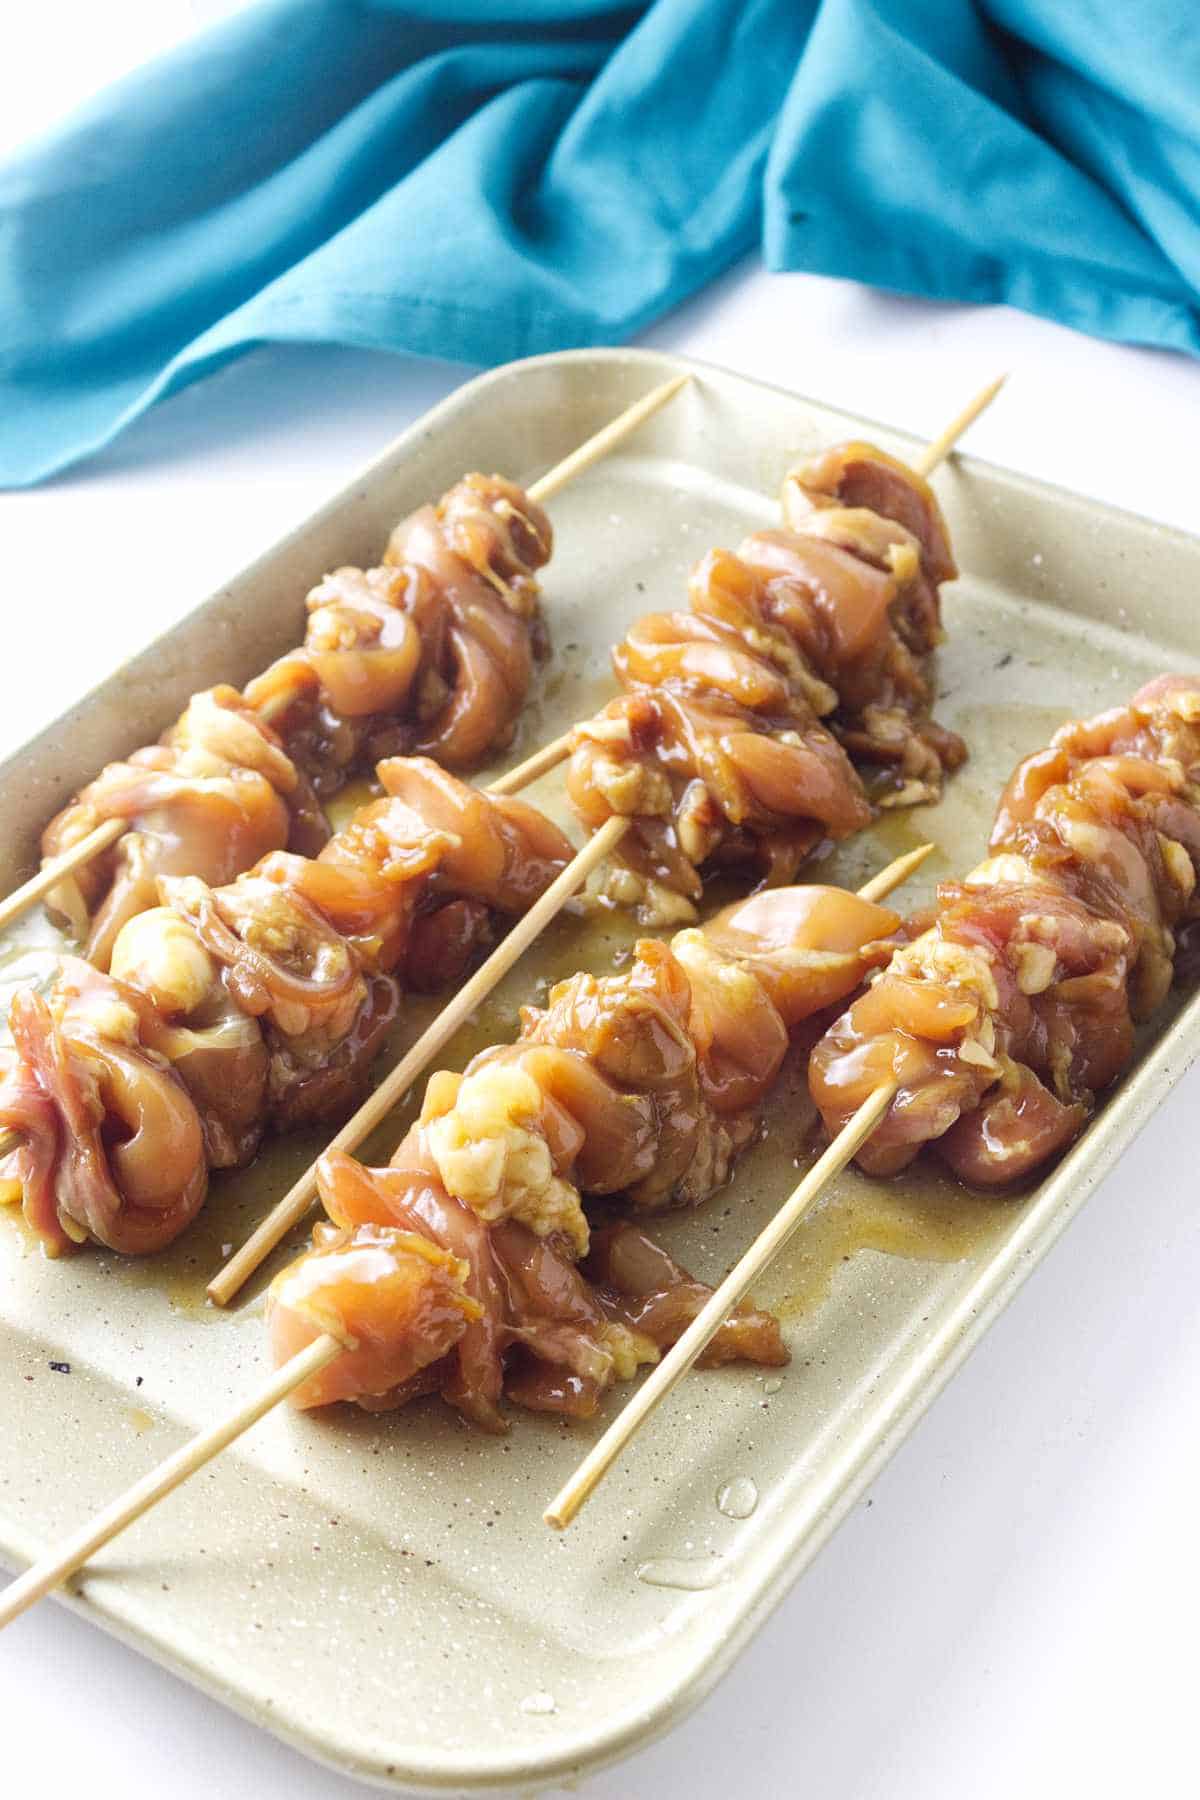 raw marinated chicken pieces on sticks ready for grilling or oven baking.